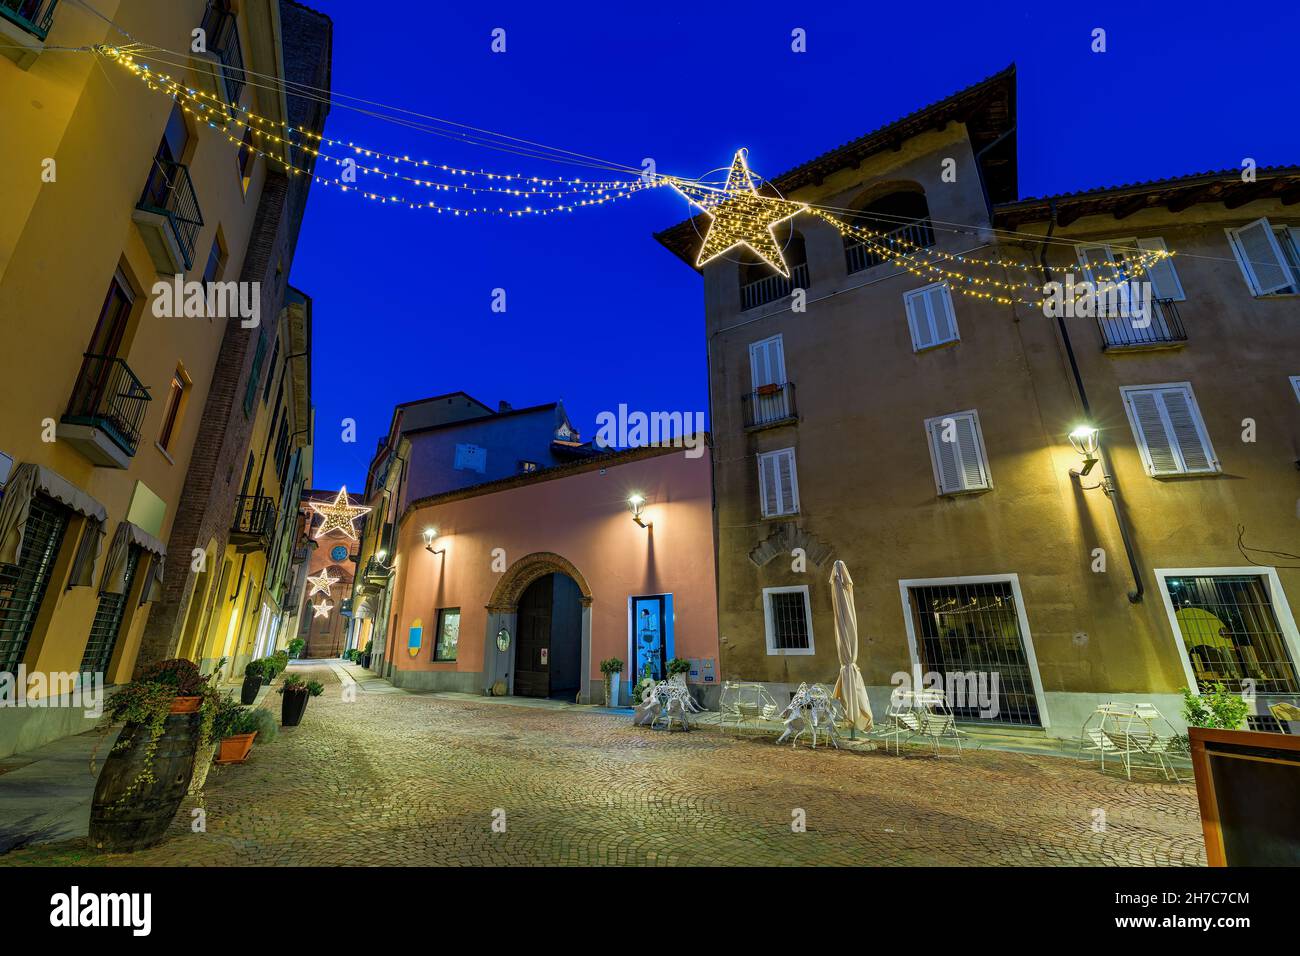 Christmas illumination over small cobblestone town square and historic buildings in the evening in Alba, Piedmont, Northern Italy.. Stock Photo